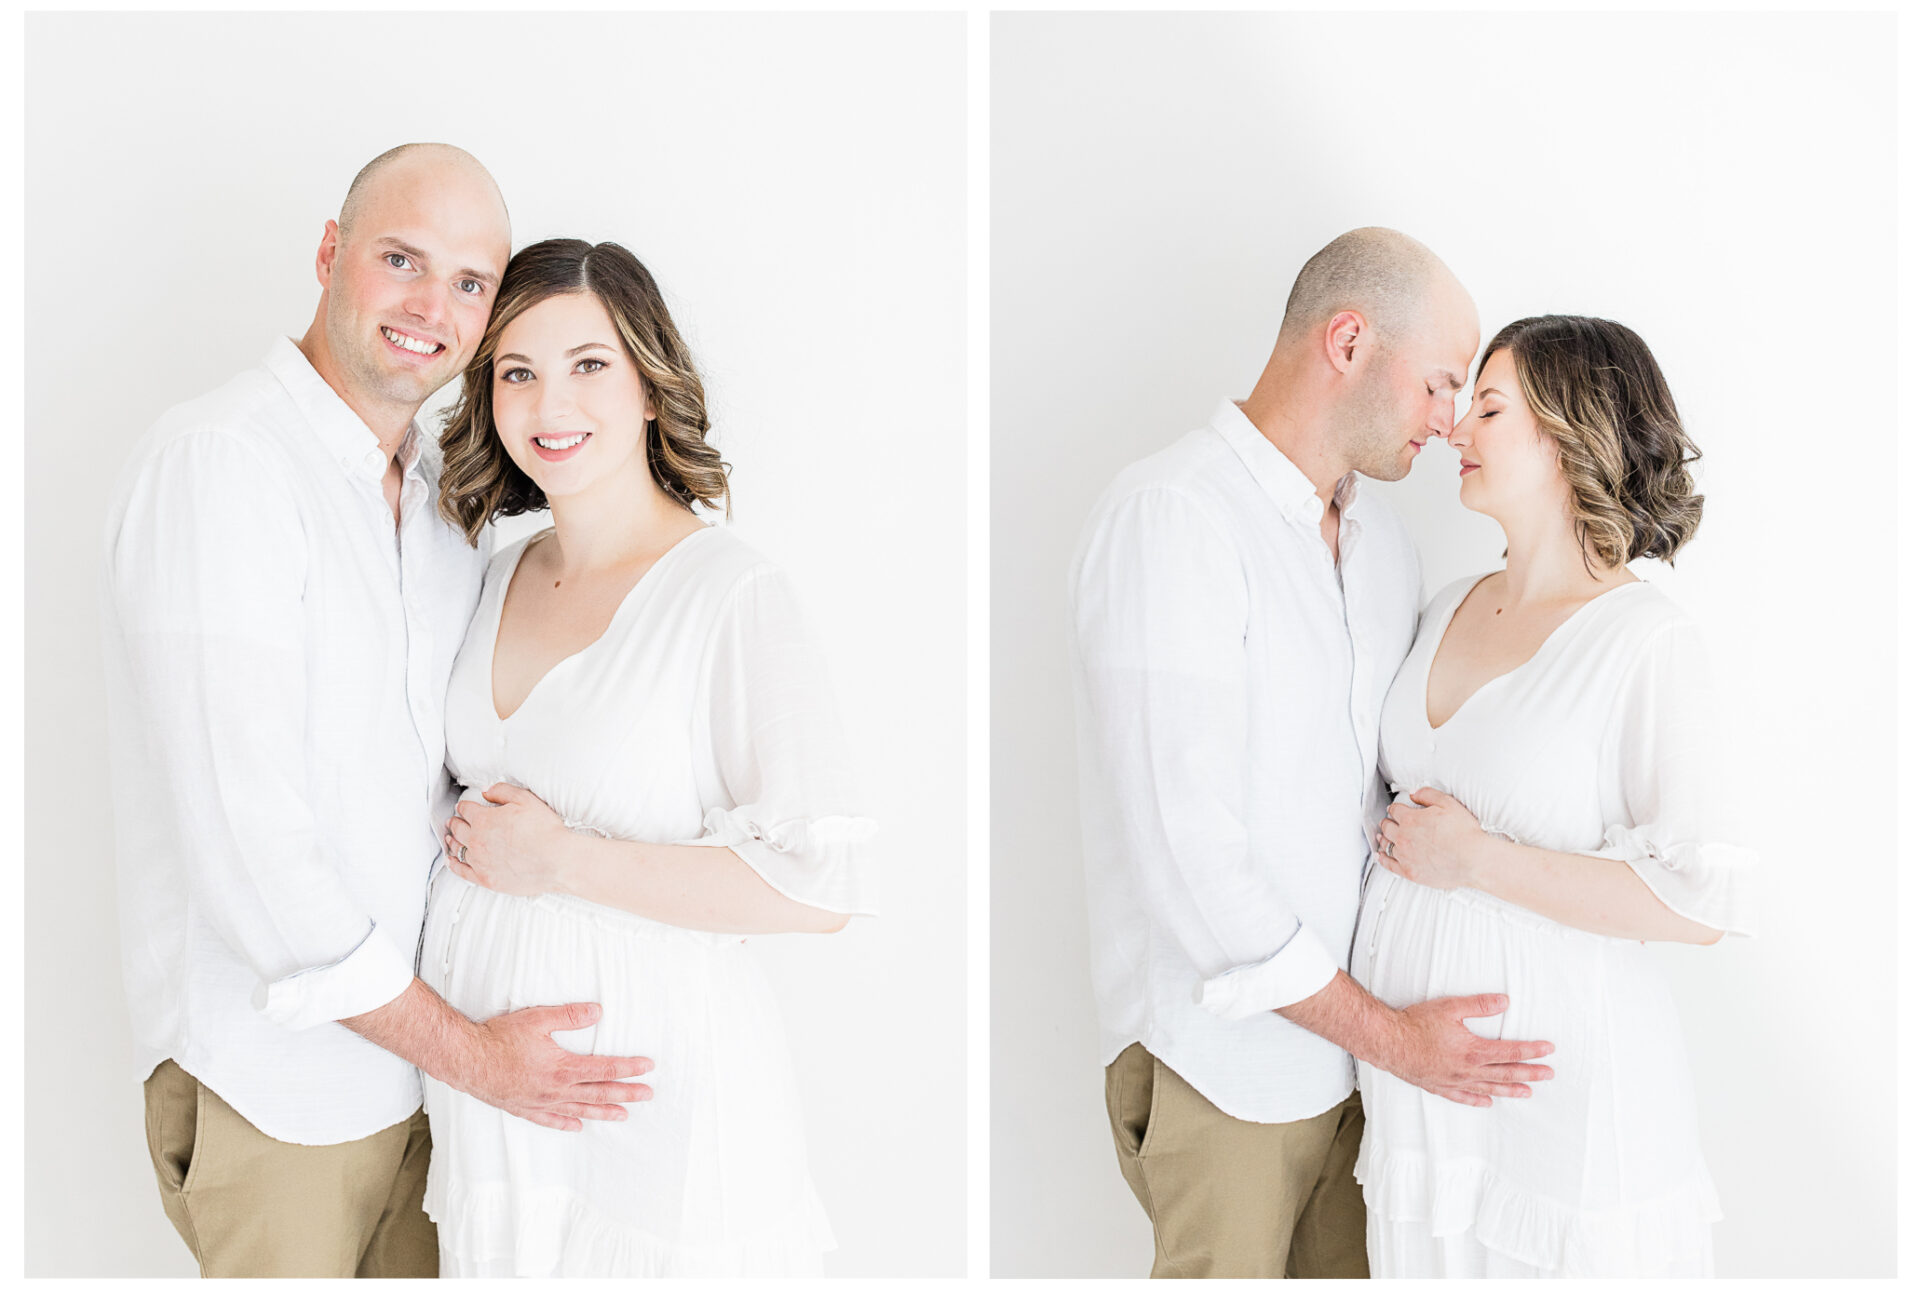 Dayton Maternity Photography | Winter Freire Photography | Dayton, Ohio Photographer | Organic Maternity Studio Session Centerville, OH | Timeless Organic Maternity Portraits